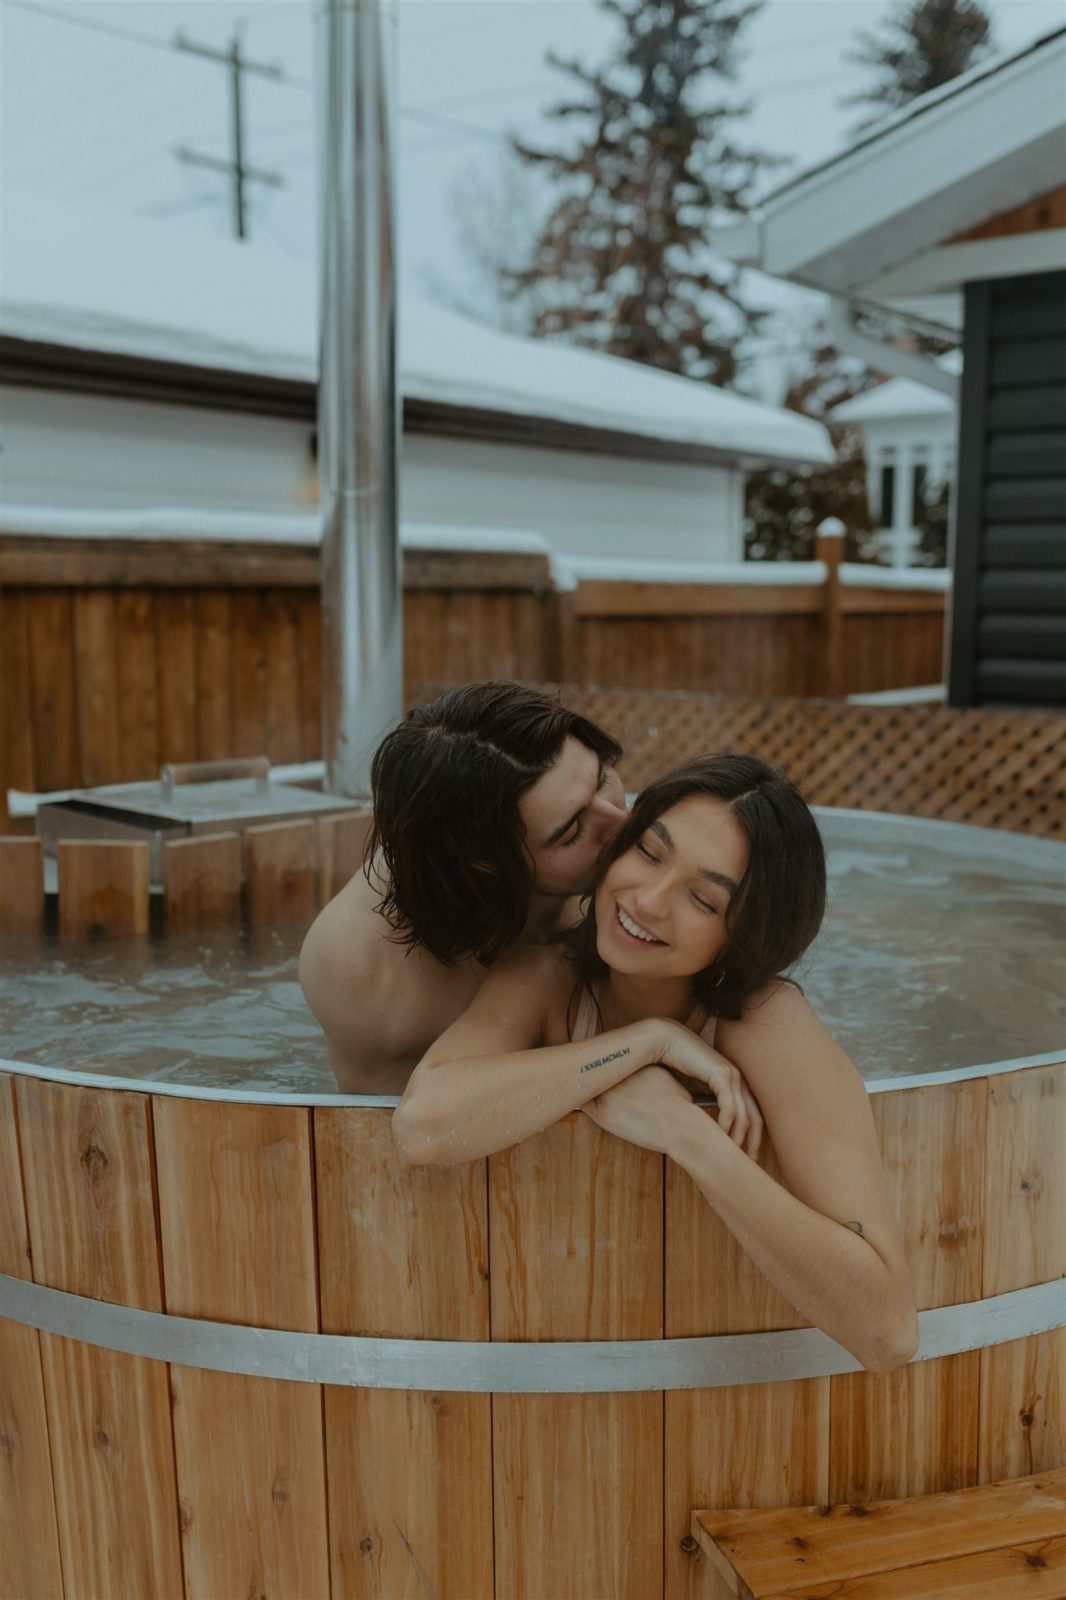 Steamy and intimate engagement session inspiration for unique couples